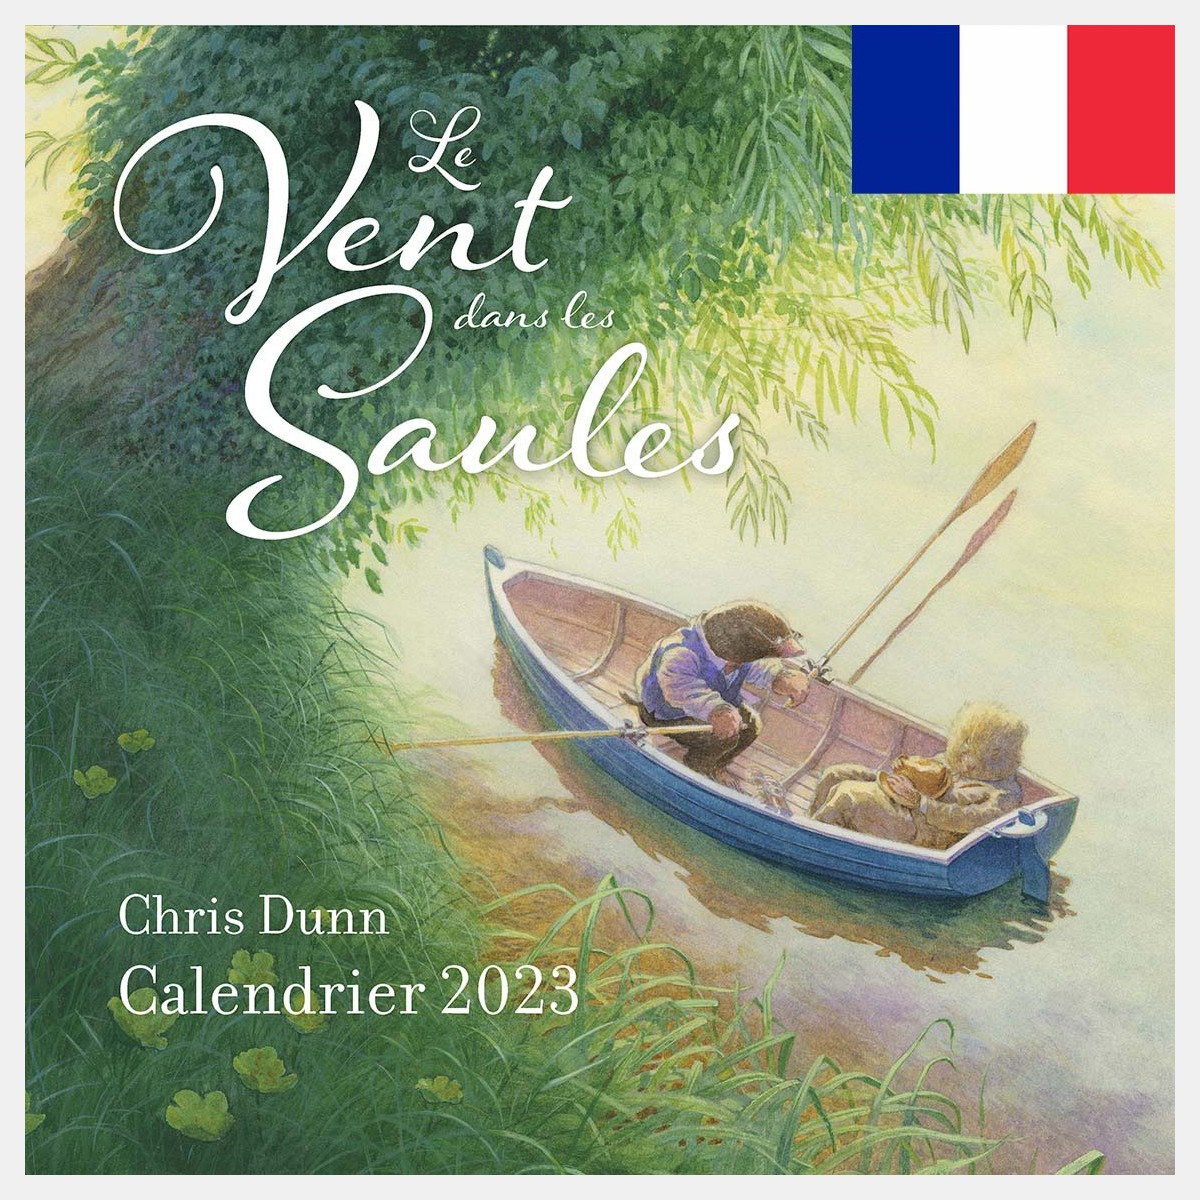 Chris Dunn - The Wind in the Willows Calendrier 2023 (Preorder - French)